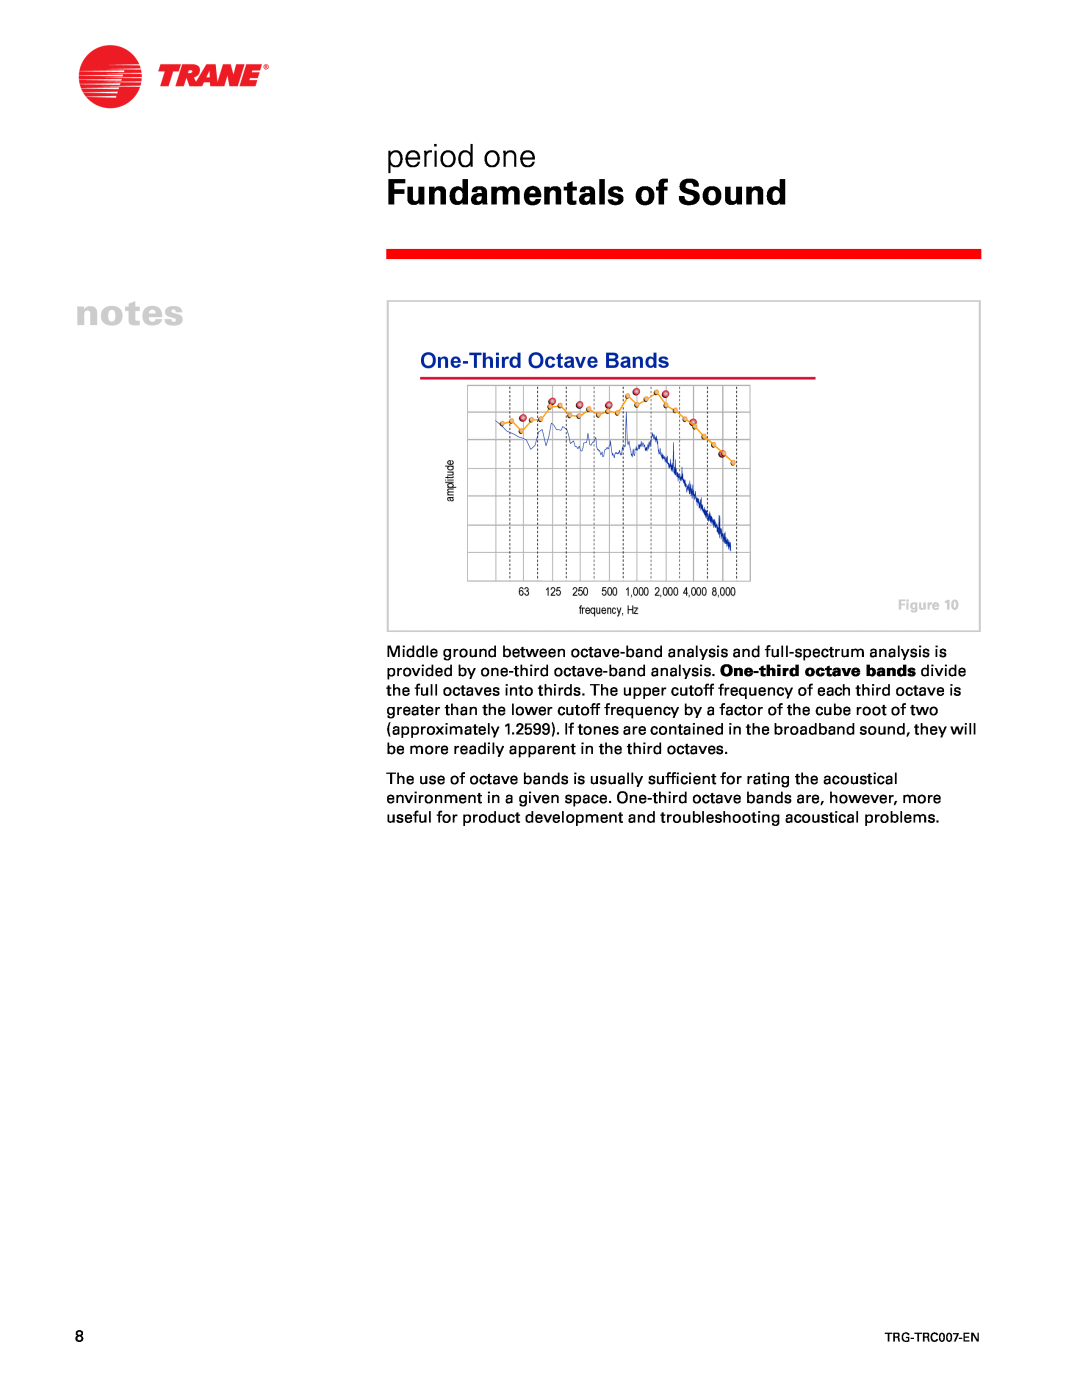 Trane TRG-TRC007-EN manual One-ThirdOctave Bands, Fundamentals of Sound, period one 